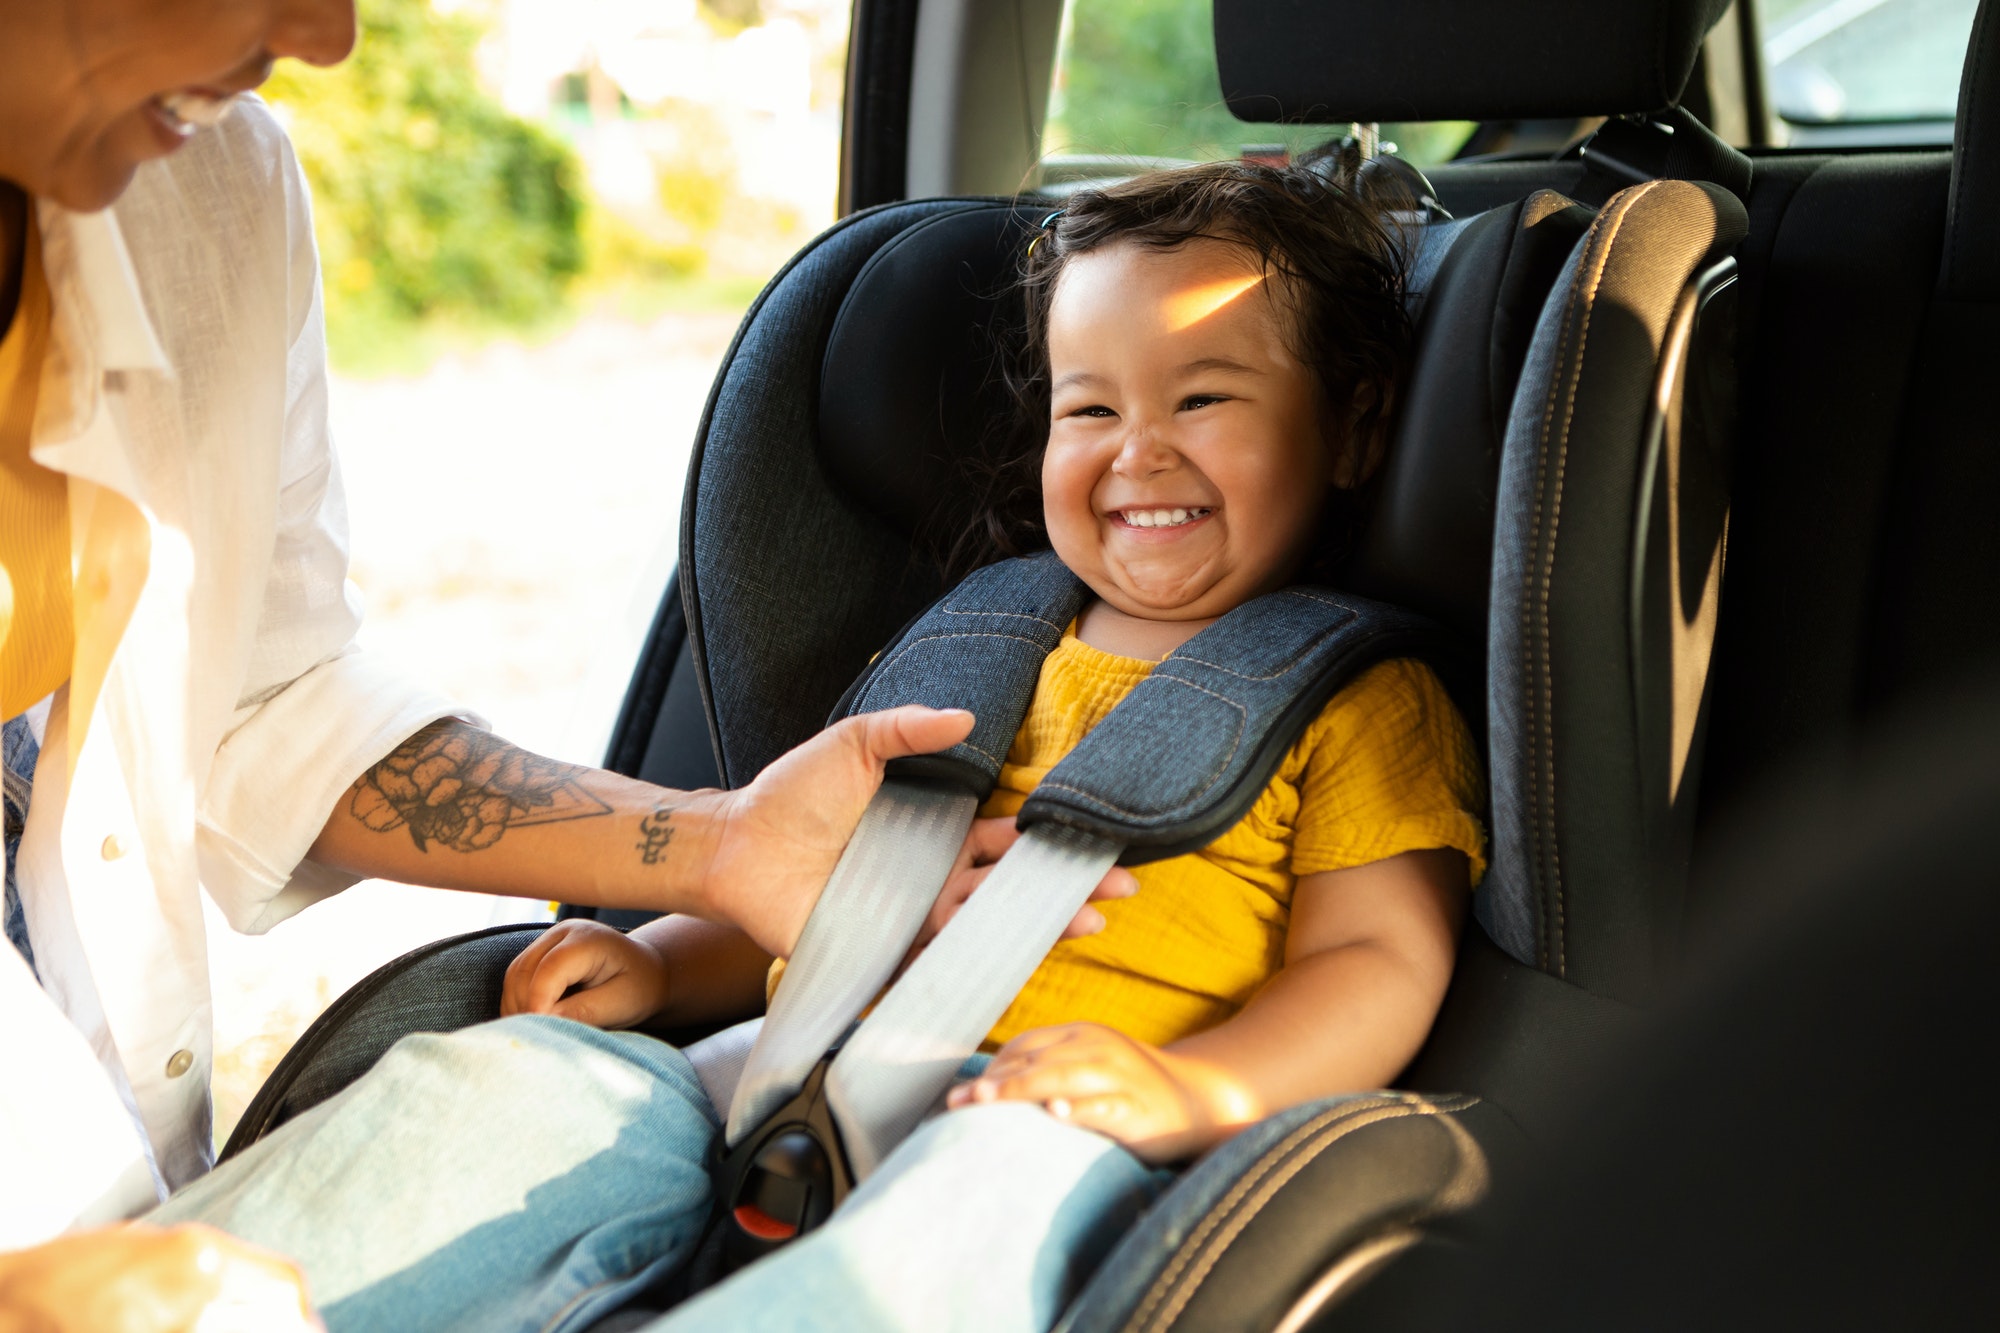 Mother Ensures Infant Safety In Car Seat In Automobile - Children's Medical Group